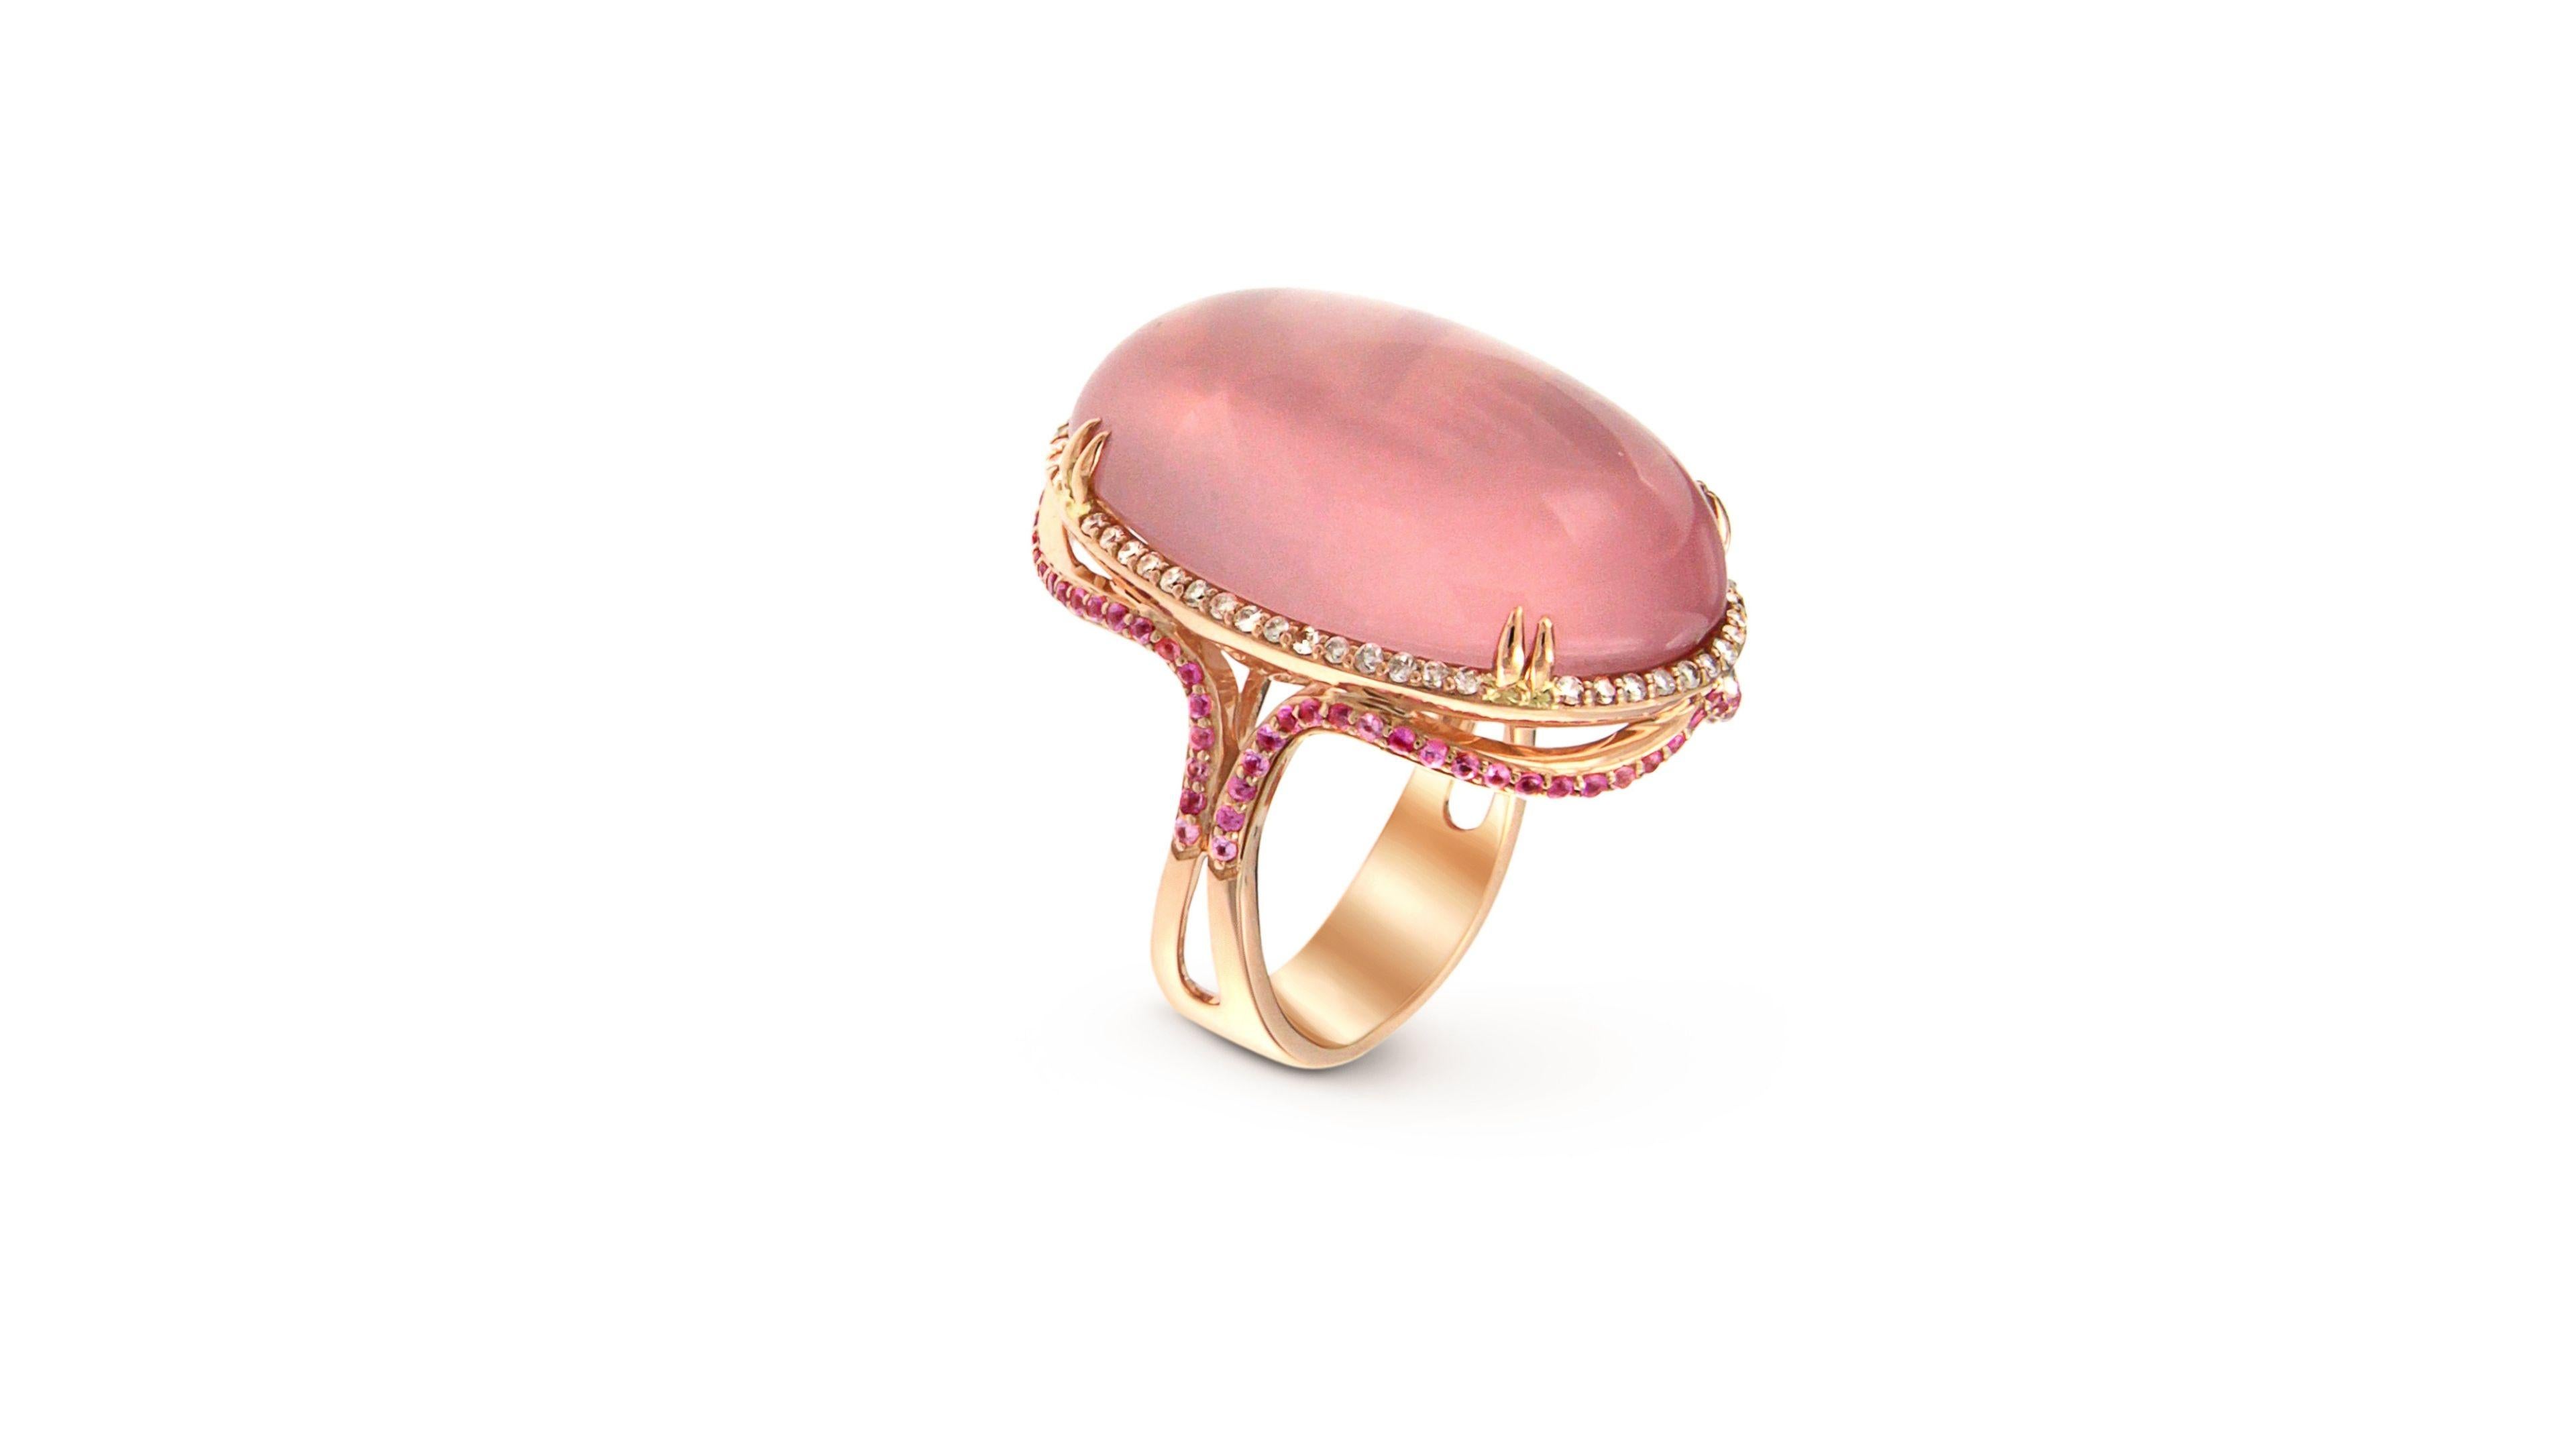 This is a unique Rose Quartz ring set in 18k Rose Gold with around 70  Diamonds and also 56  pink Sapphires.  Has a very elegant look and stands out.

Let us know your size